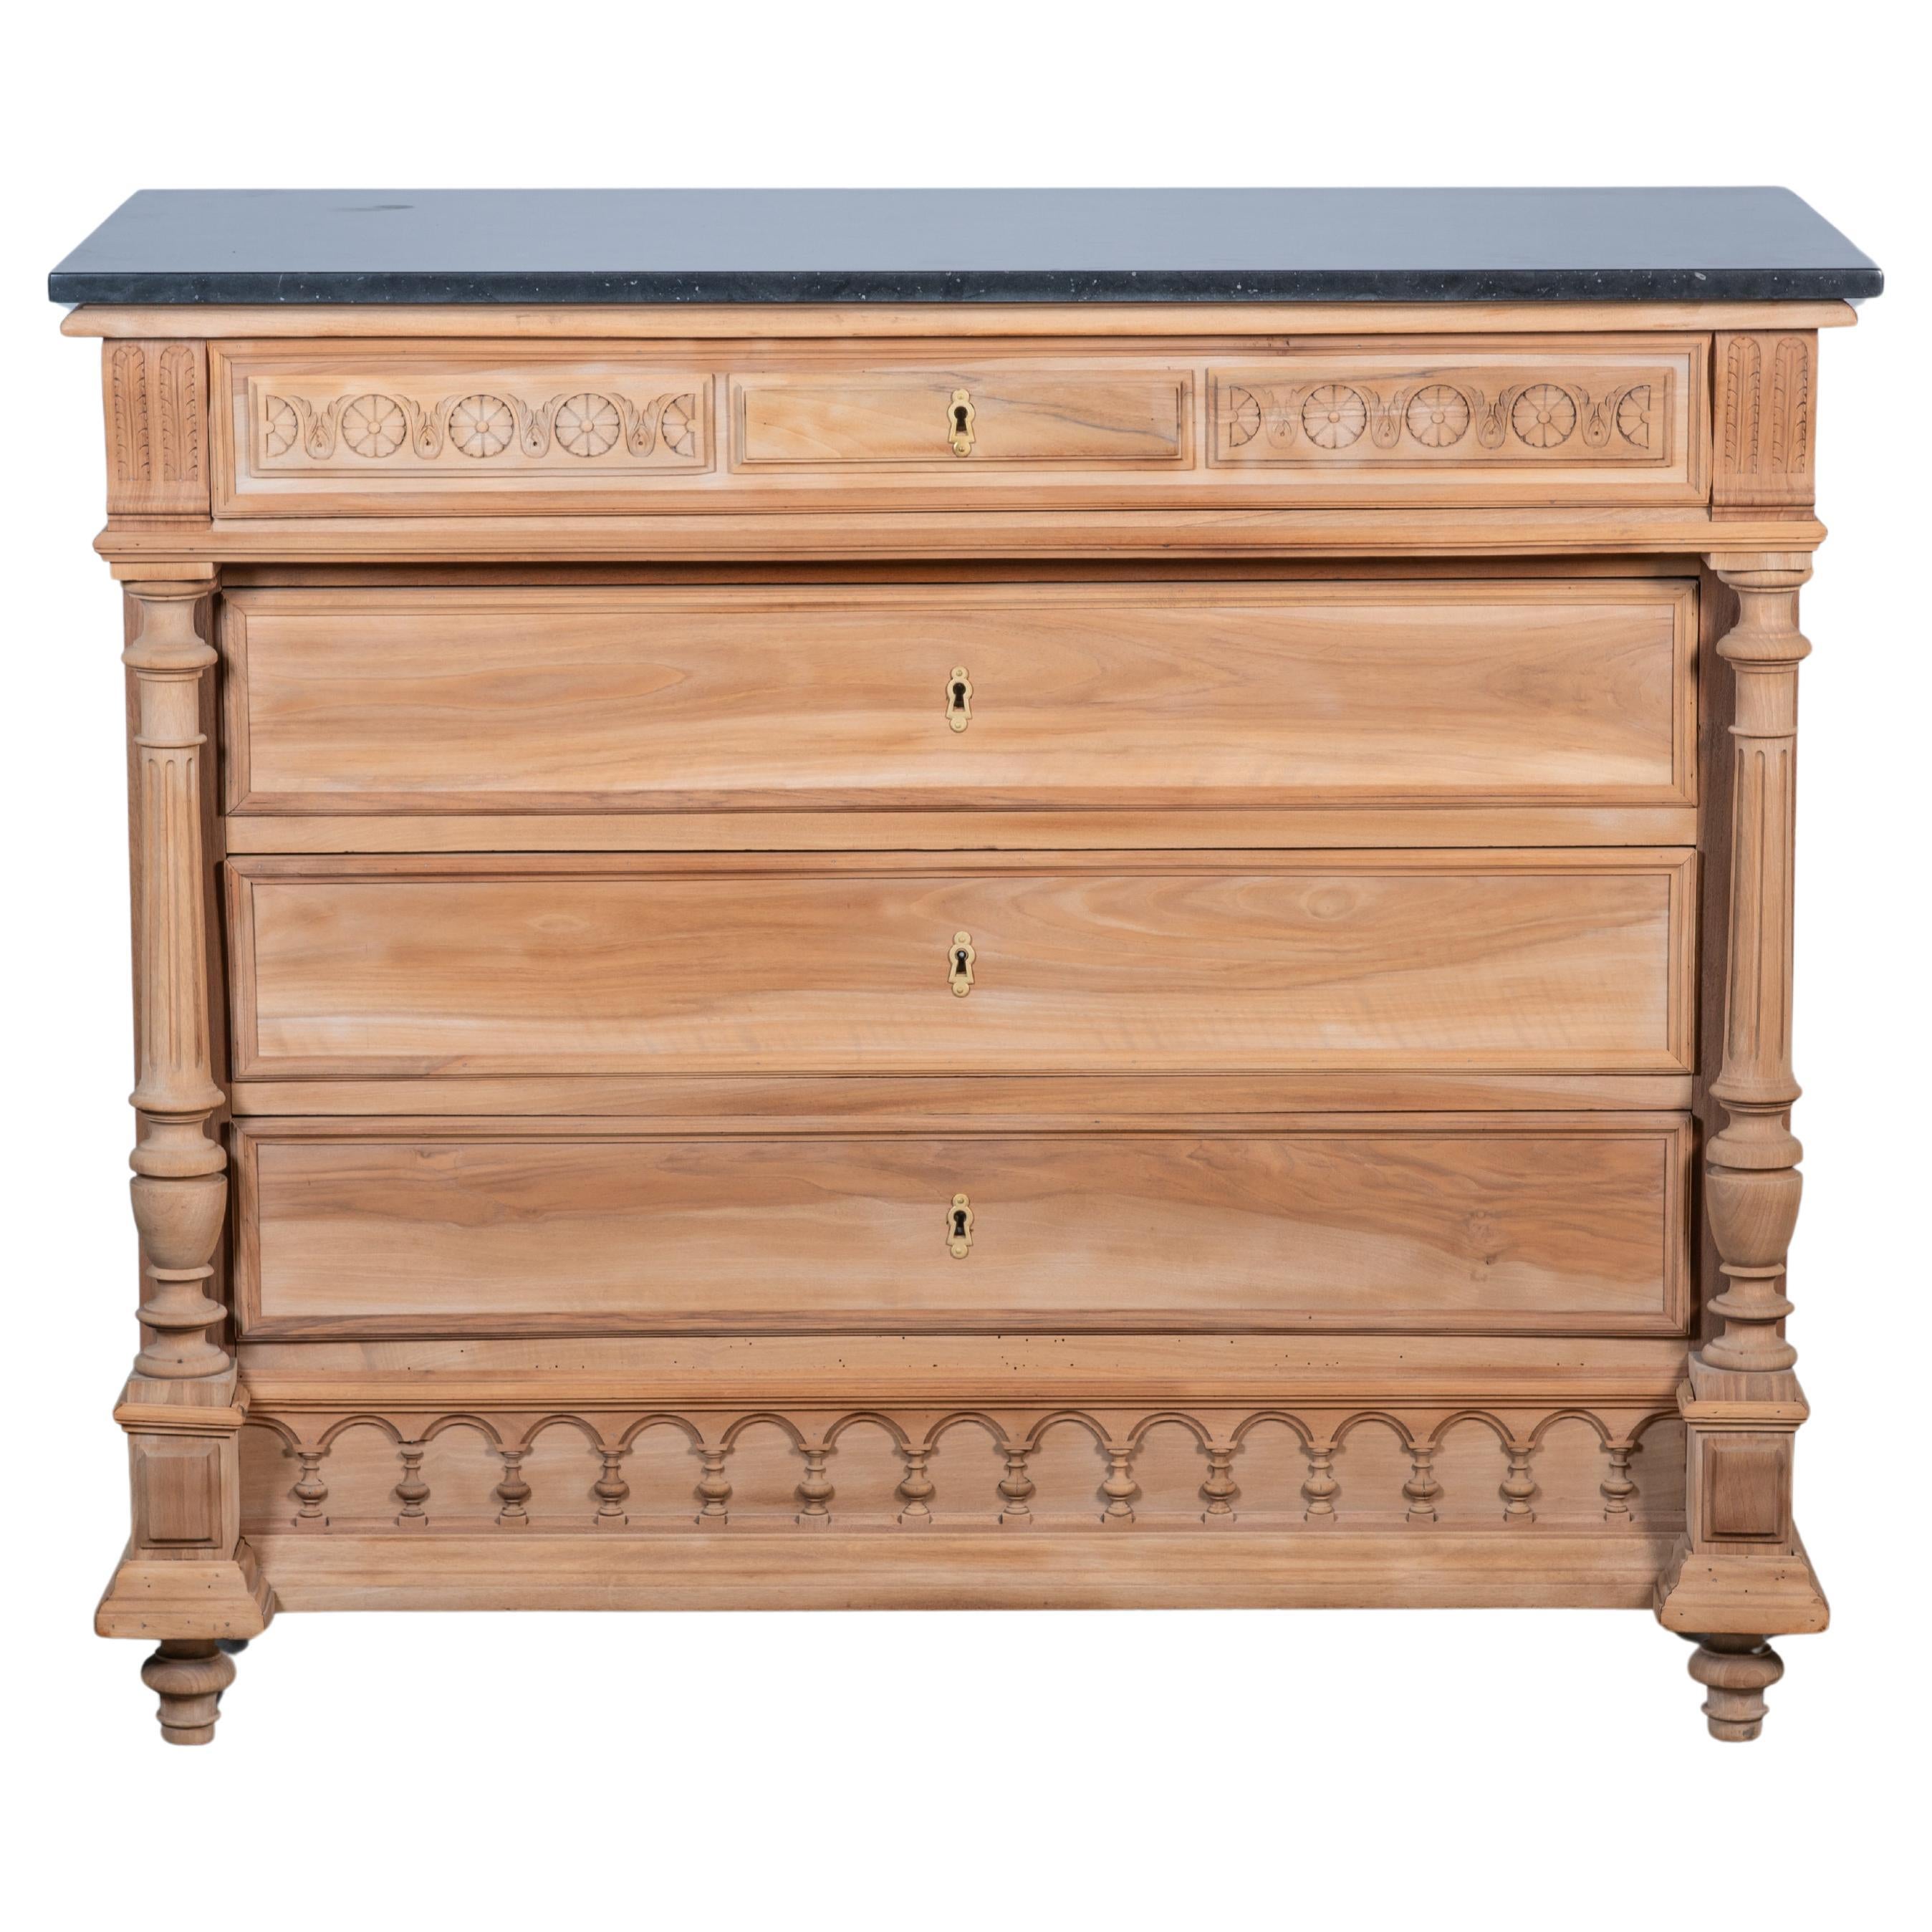 1910s Commodes and Chests of Drawers